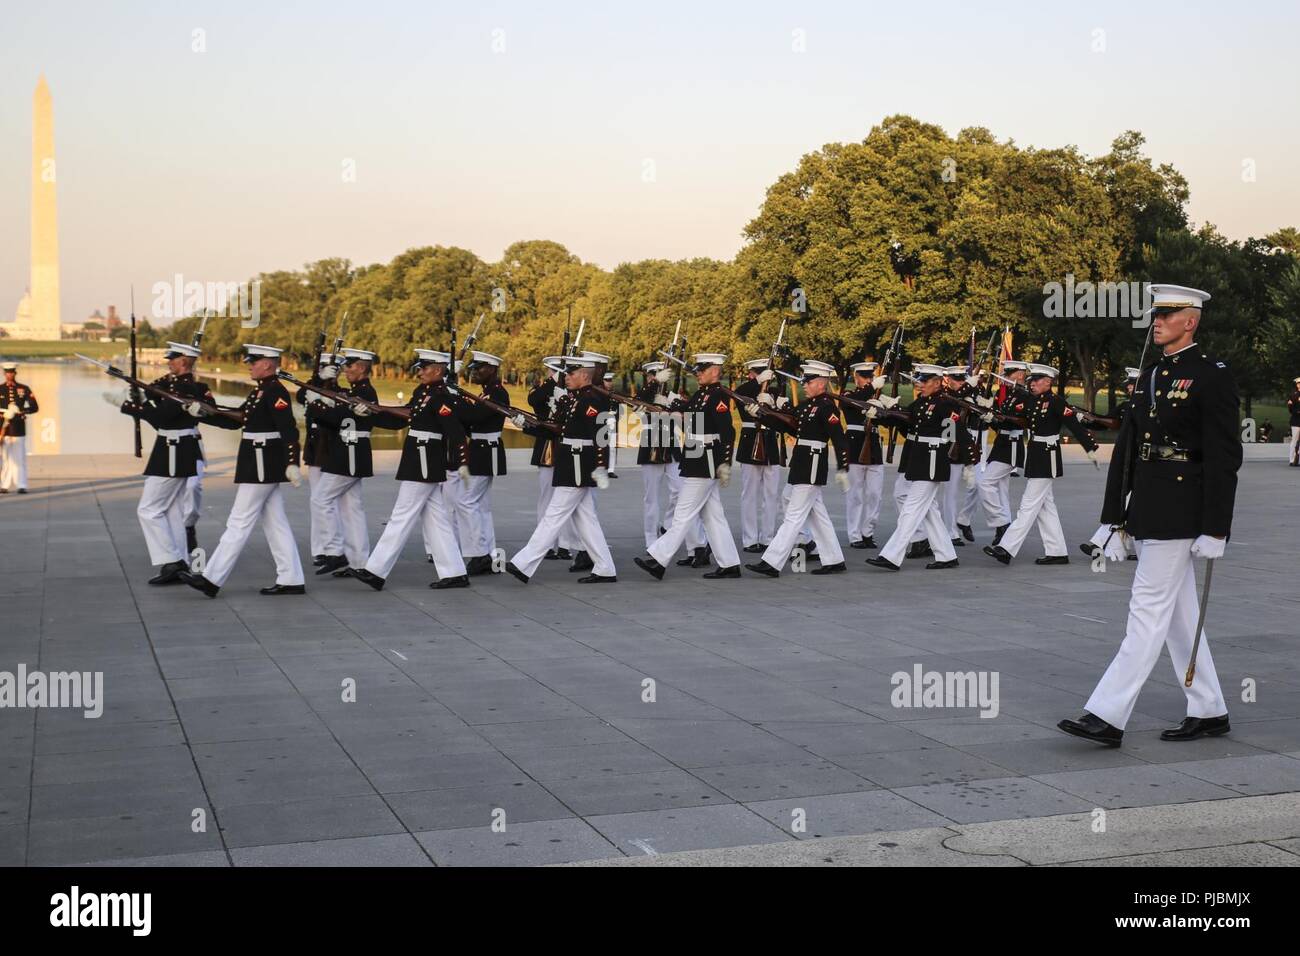 Marines with the U.S. Marine Corps Silent Drill Platoon march across the parade deck during a Tuesday Sunset Parade at the Lincoln Memorial, Washington D.C., July 10, 2018. The guest of honor for the parade was the former Vice President of the U.S., Joe Biden, and the hosting official was the Staff Judge Advocate to the Commandant of the Marine Corps, Maj. Gen. John R. Ewers Jr. Stock Photo